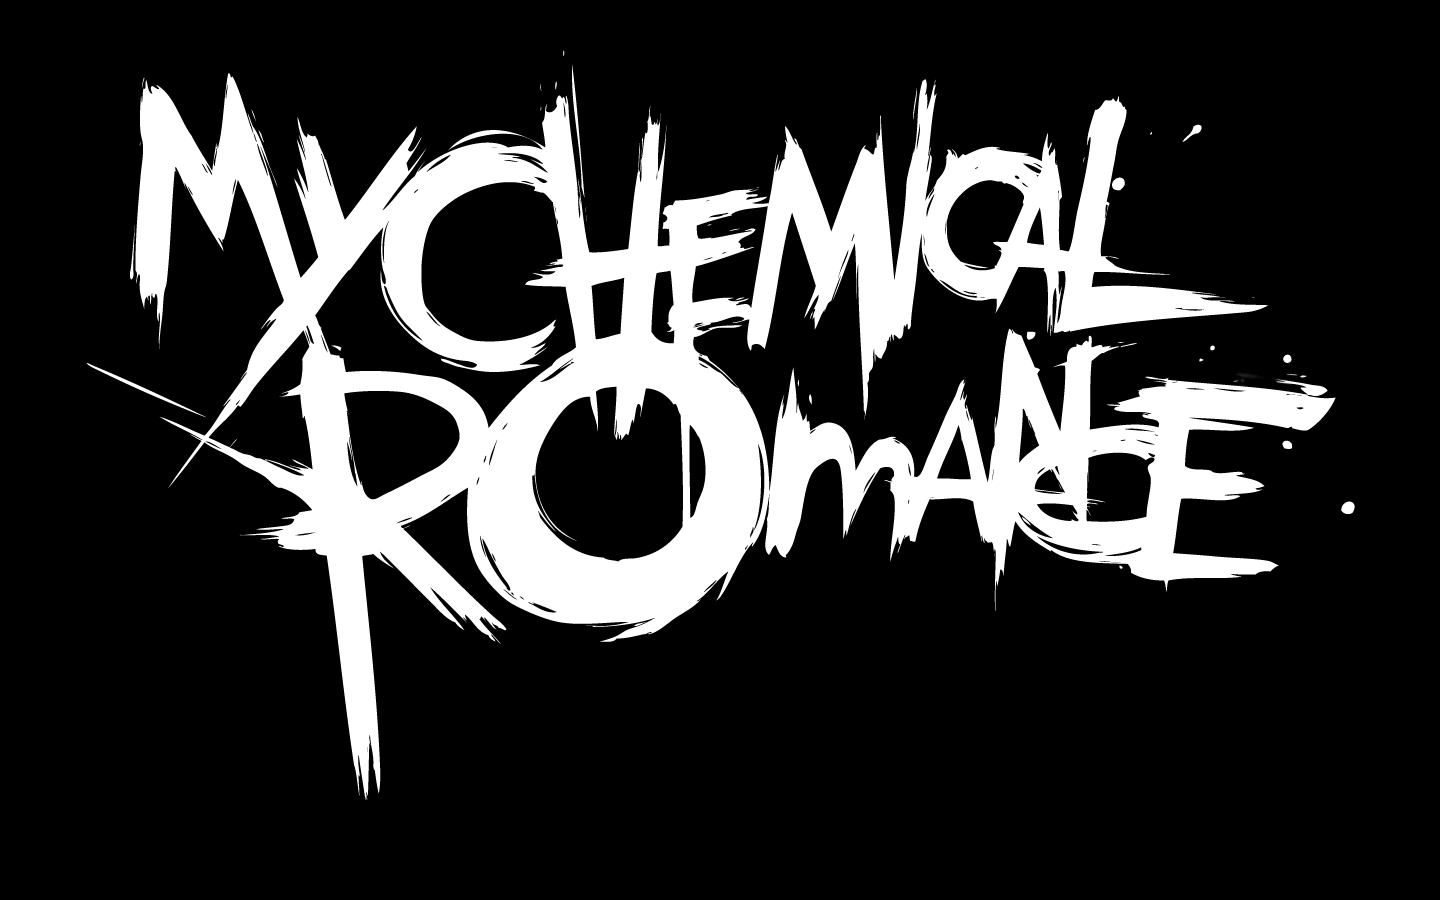 My Chemical Romance Logo Wallpapers HD - Wallpaper Cave